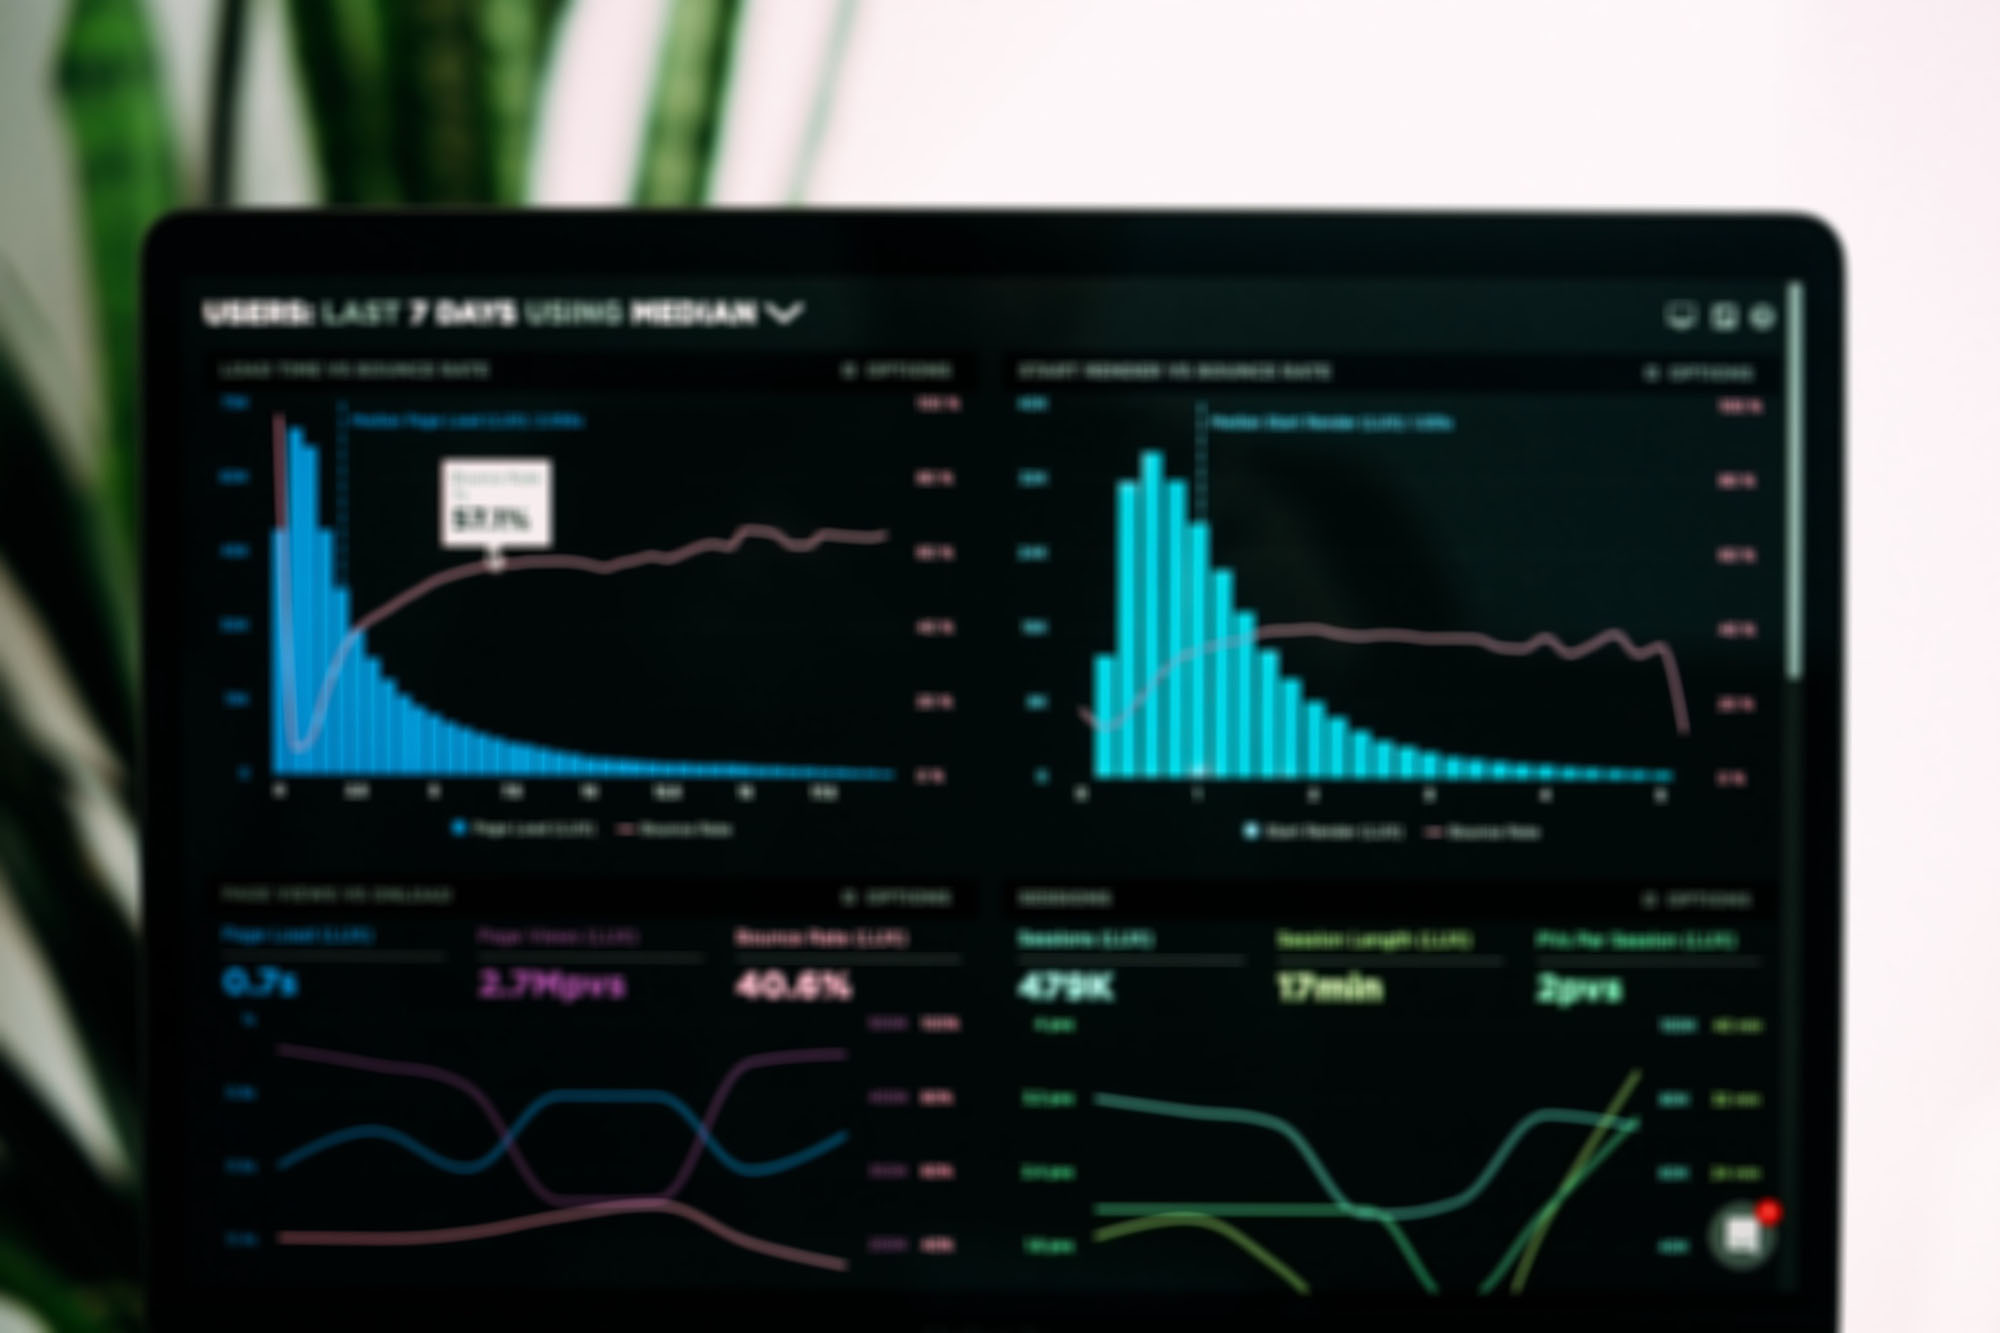 Project management and <br> visualized analysis platform